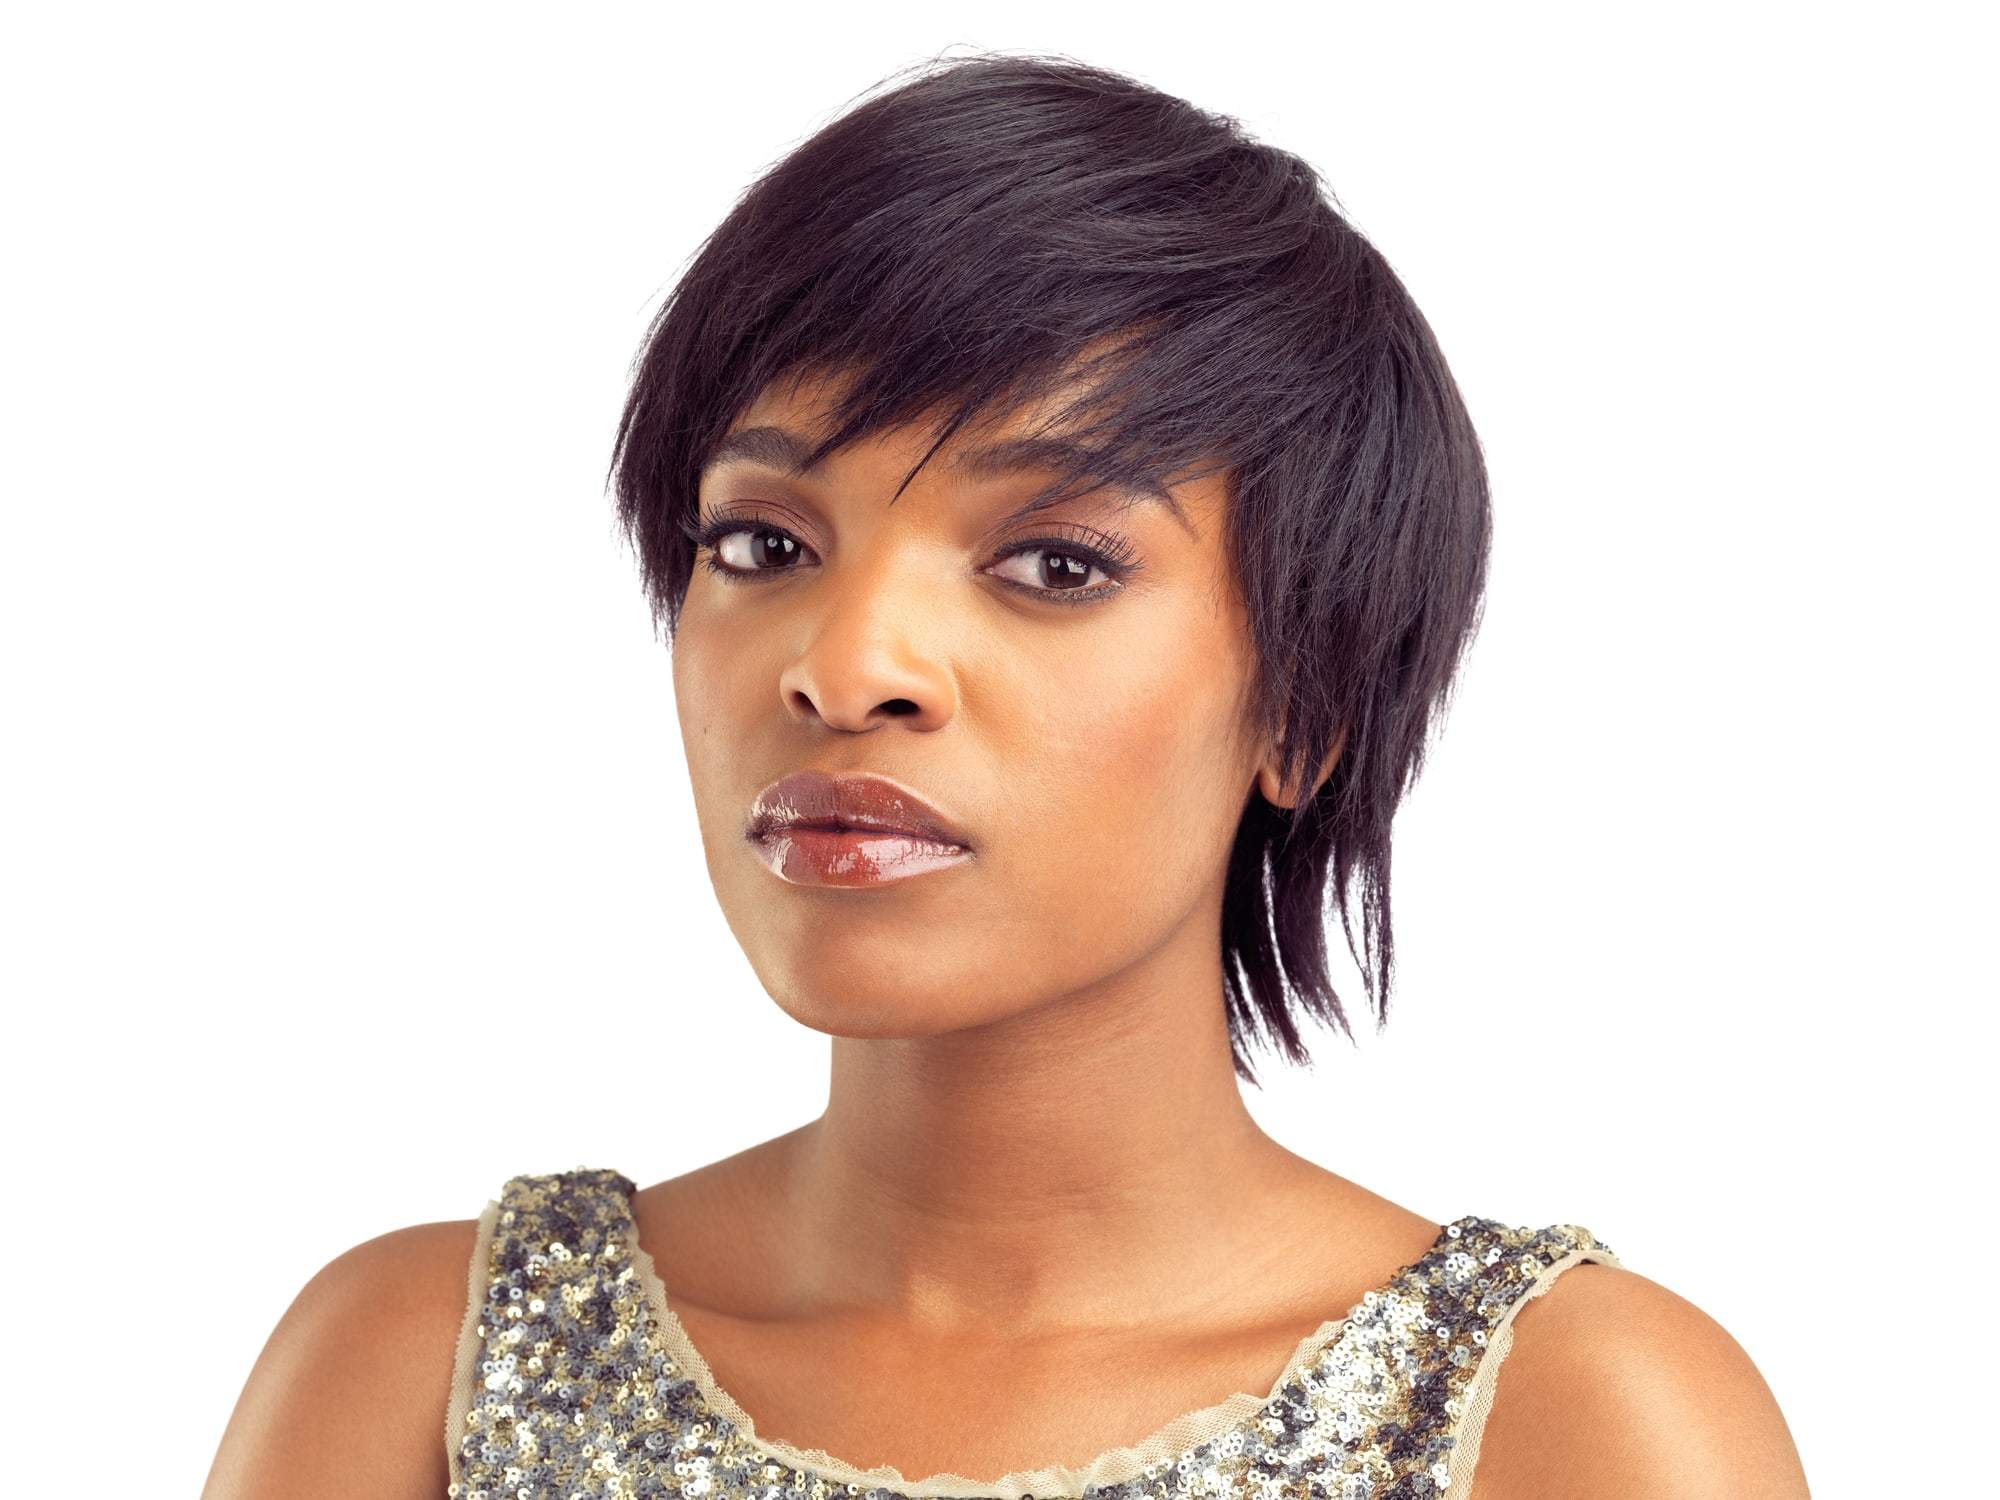 The 70 Best Short Haircut and Hairstyle Ideas